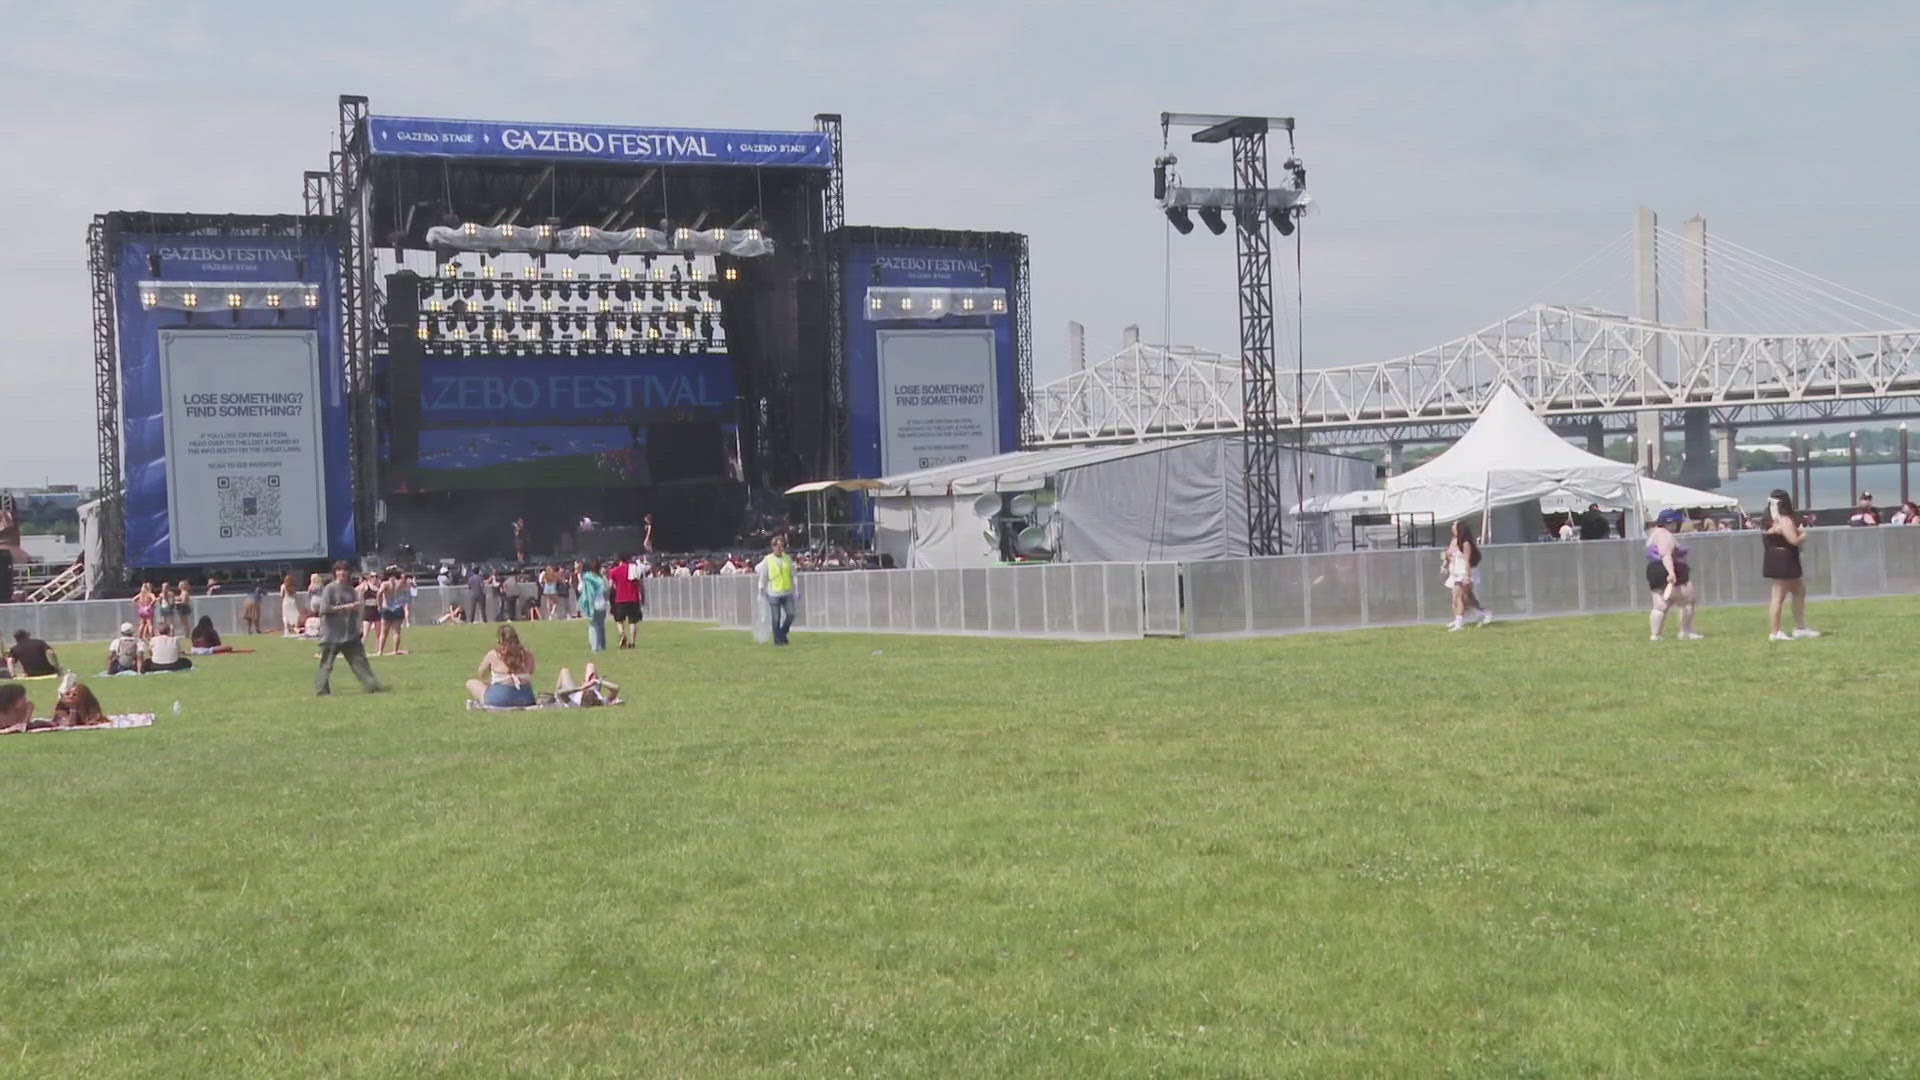 Music festivals on both sides of the Ohio River bring out large crowds to enjoy good music!